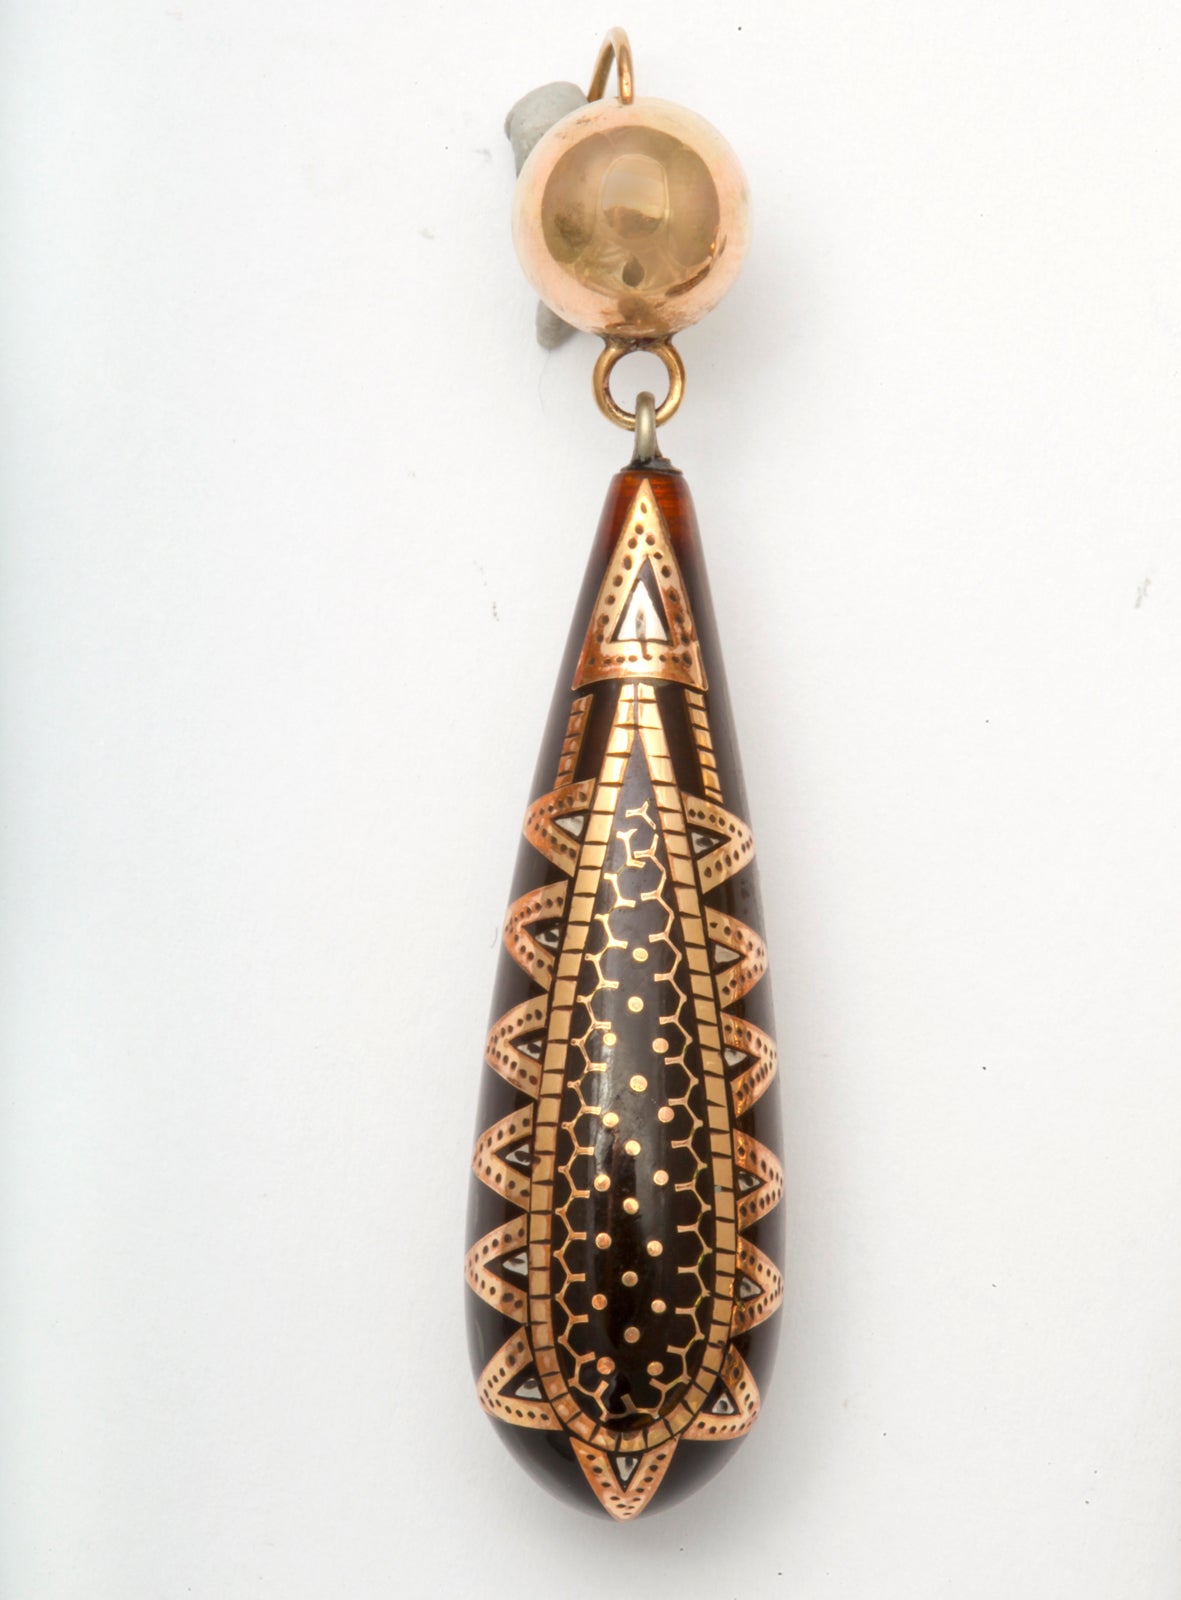 Pique jewelry is an example of an art form of the Victorian age. Tortoise shell was incised with complex patterns and filled with gold and silver. The skill and precision of the work is awe inspiring. In this example of pique work the pattern